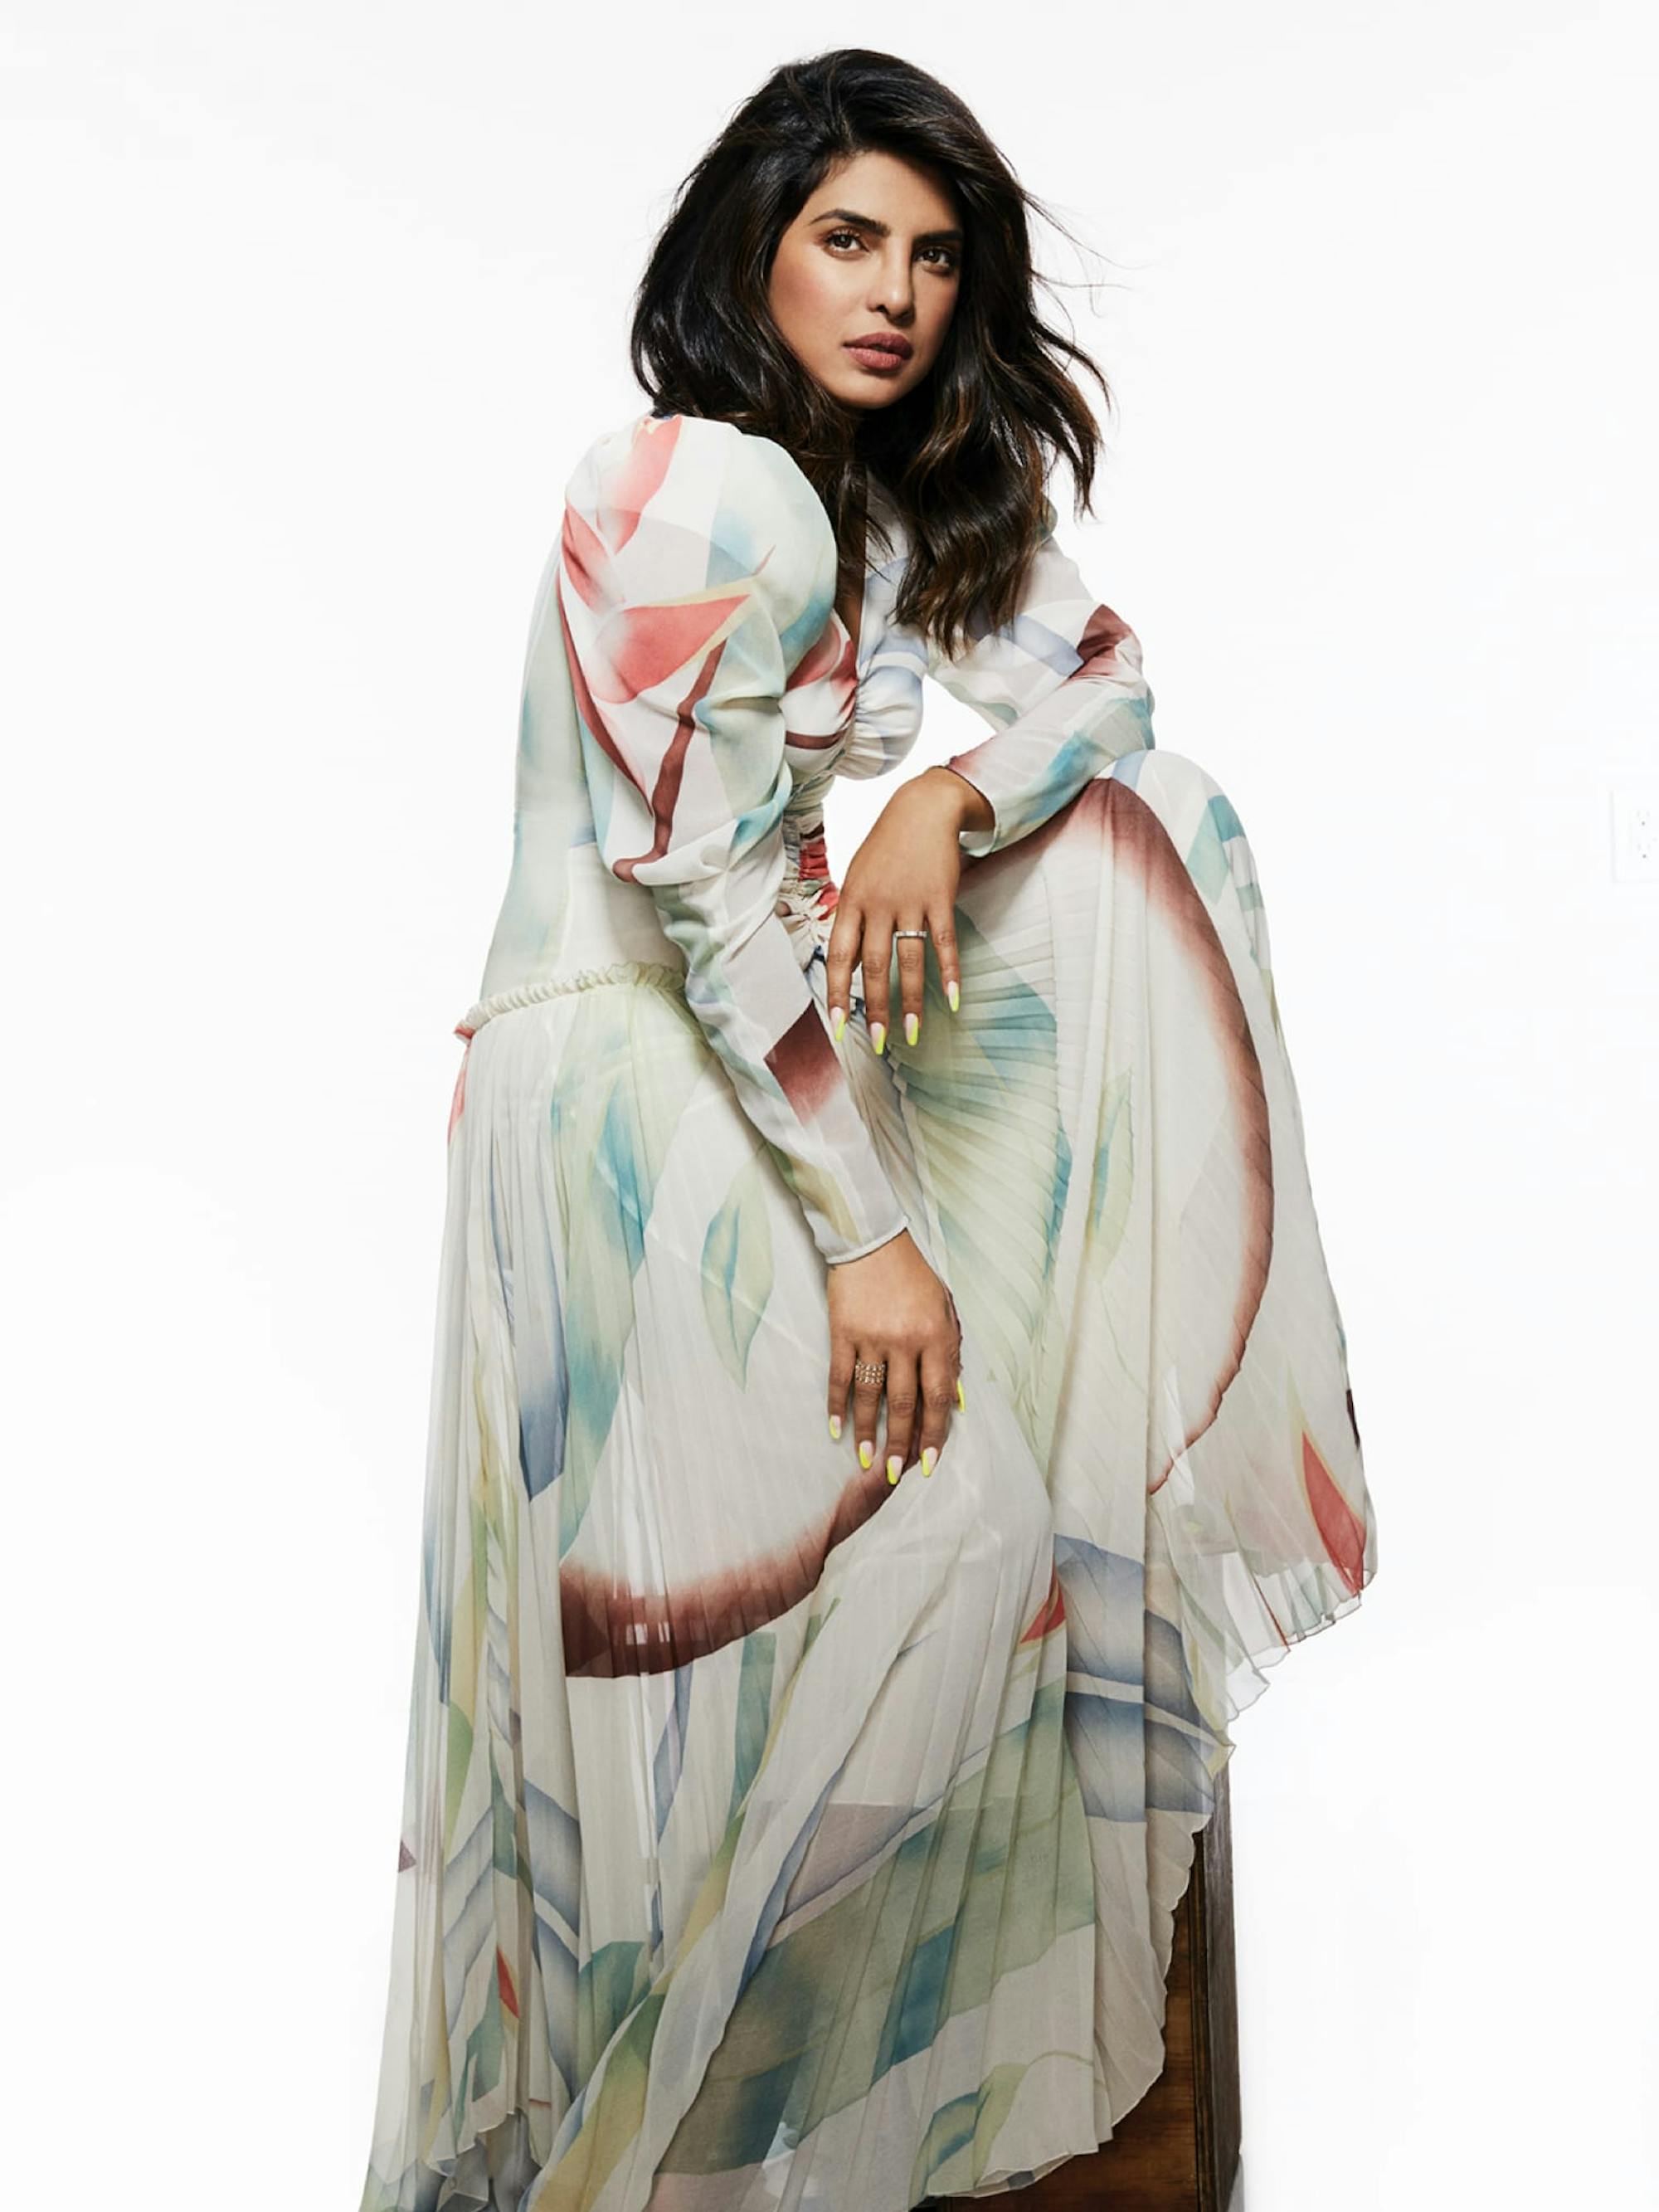 Priyanka Chopra Jonas poses perched on a seat. The skirt of her colorful dress cascades like a waterfall. Her manicure is impeccable.